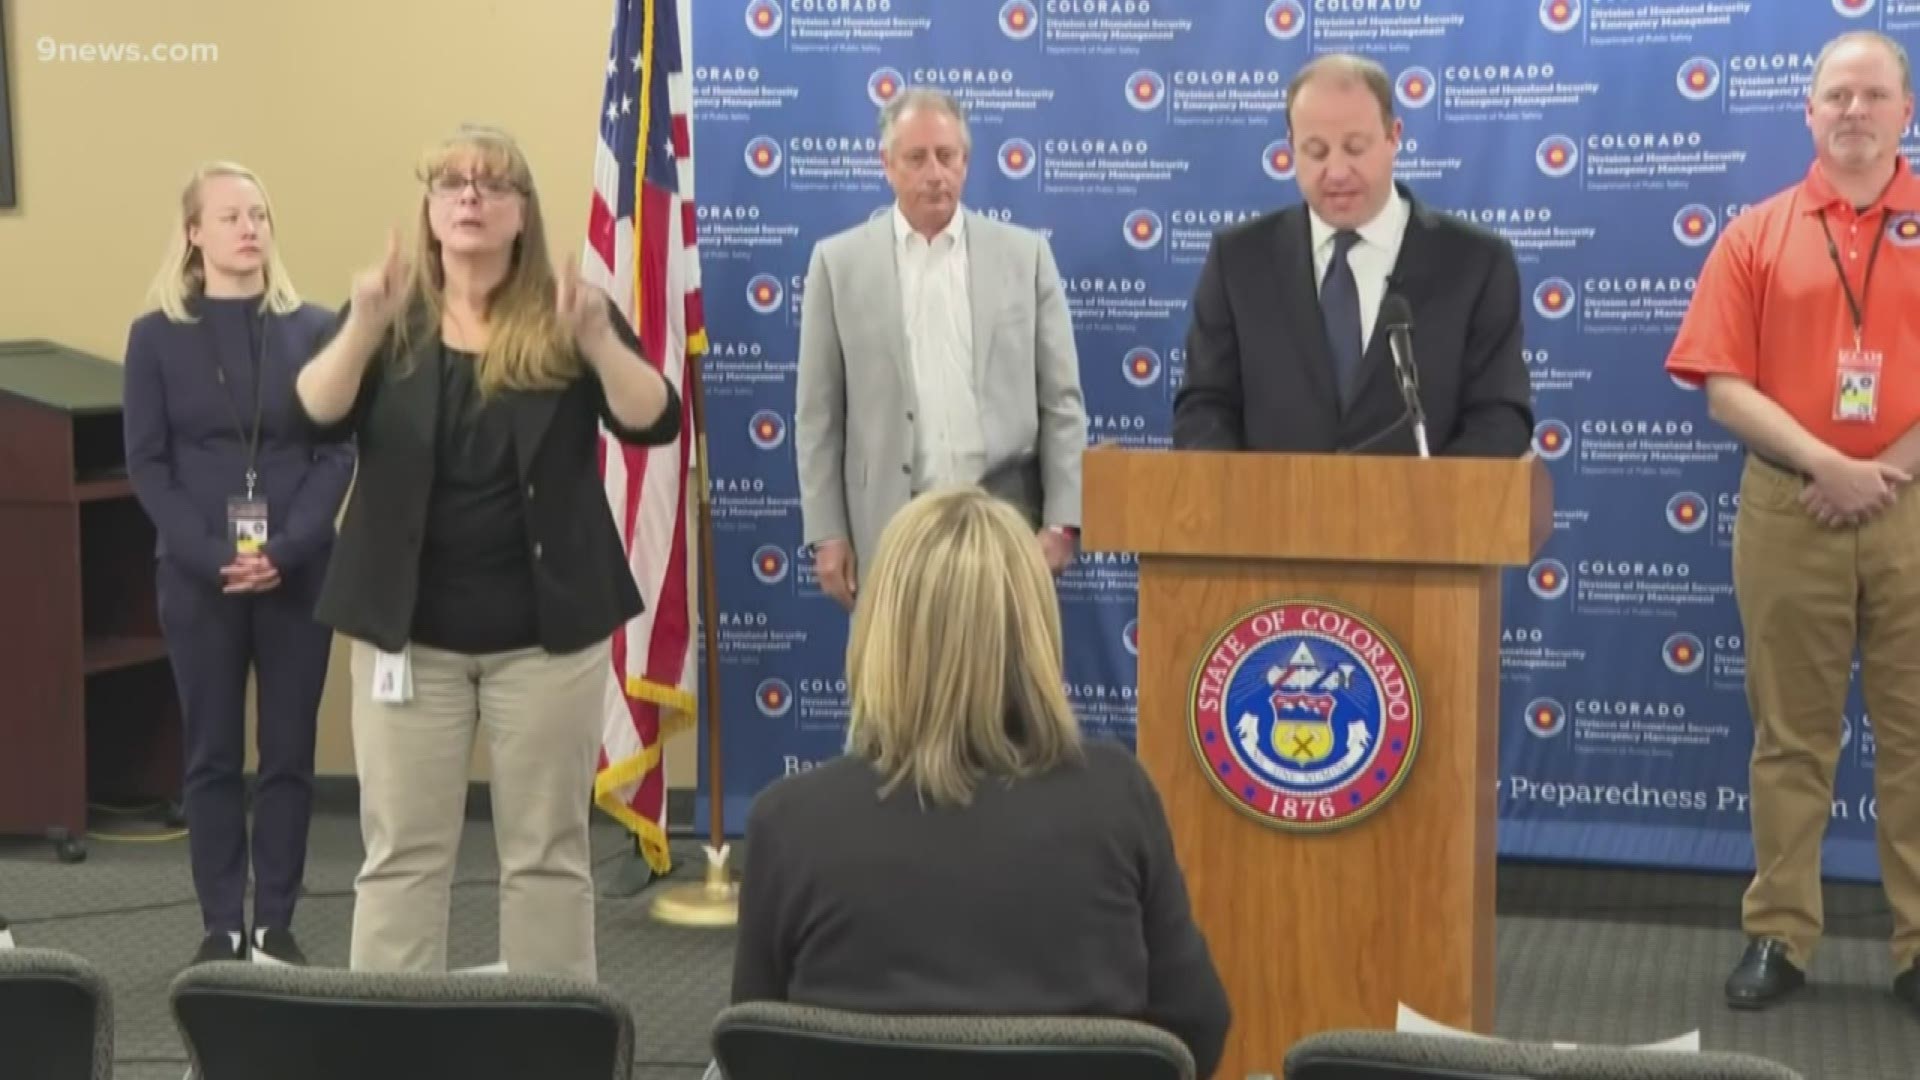 On March 24, businesses will have to follow a new public health order signed by Gov. Jared Polis
requiring a 50% reduction of in-person staff during operating hours.